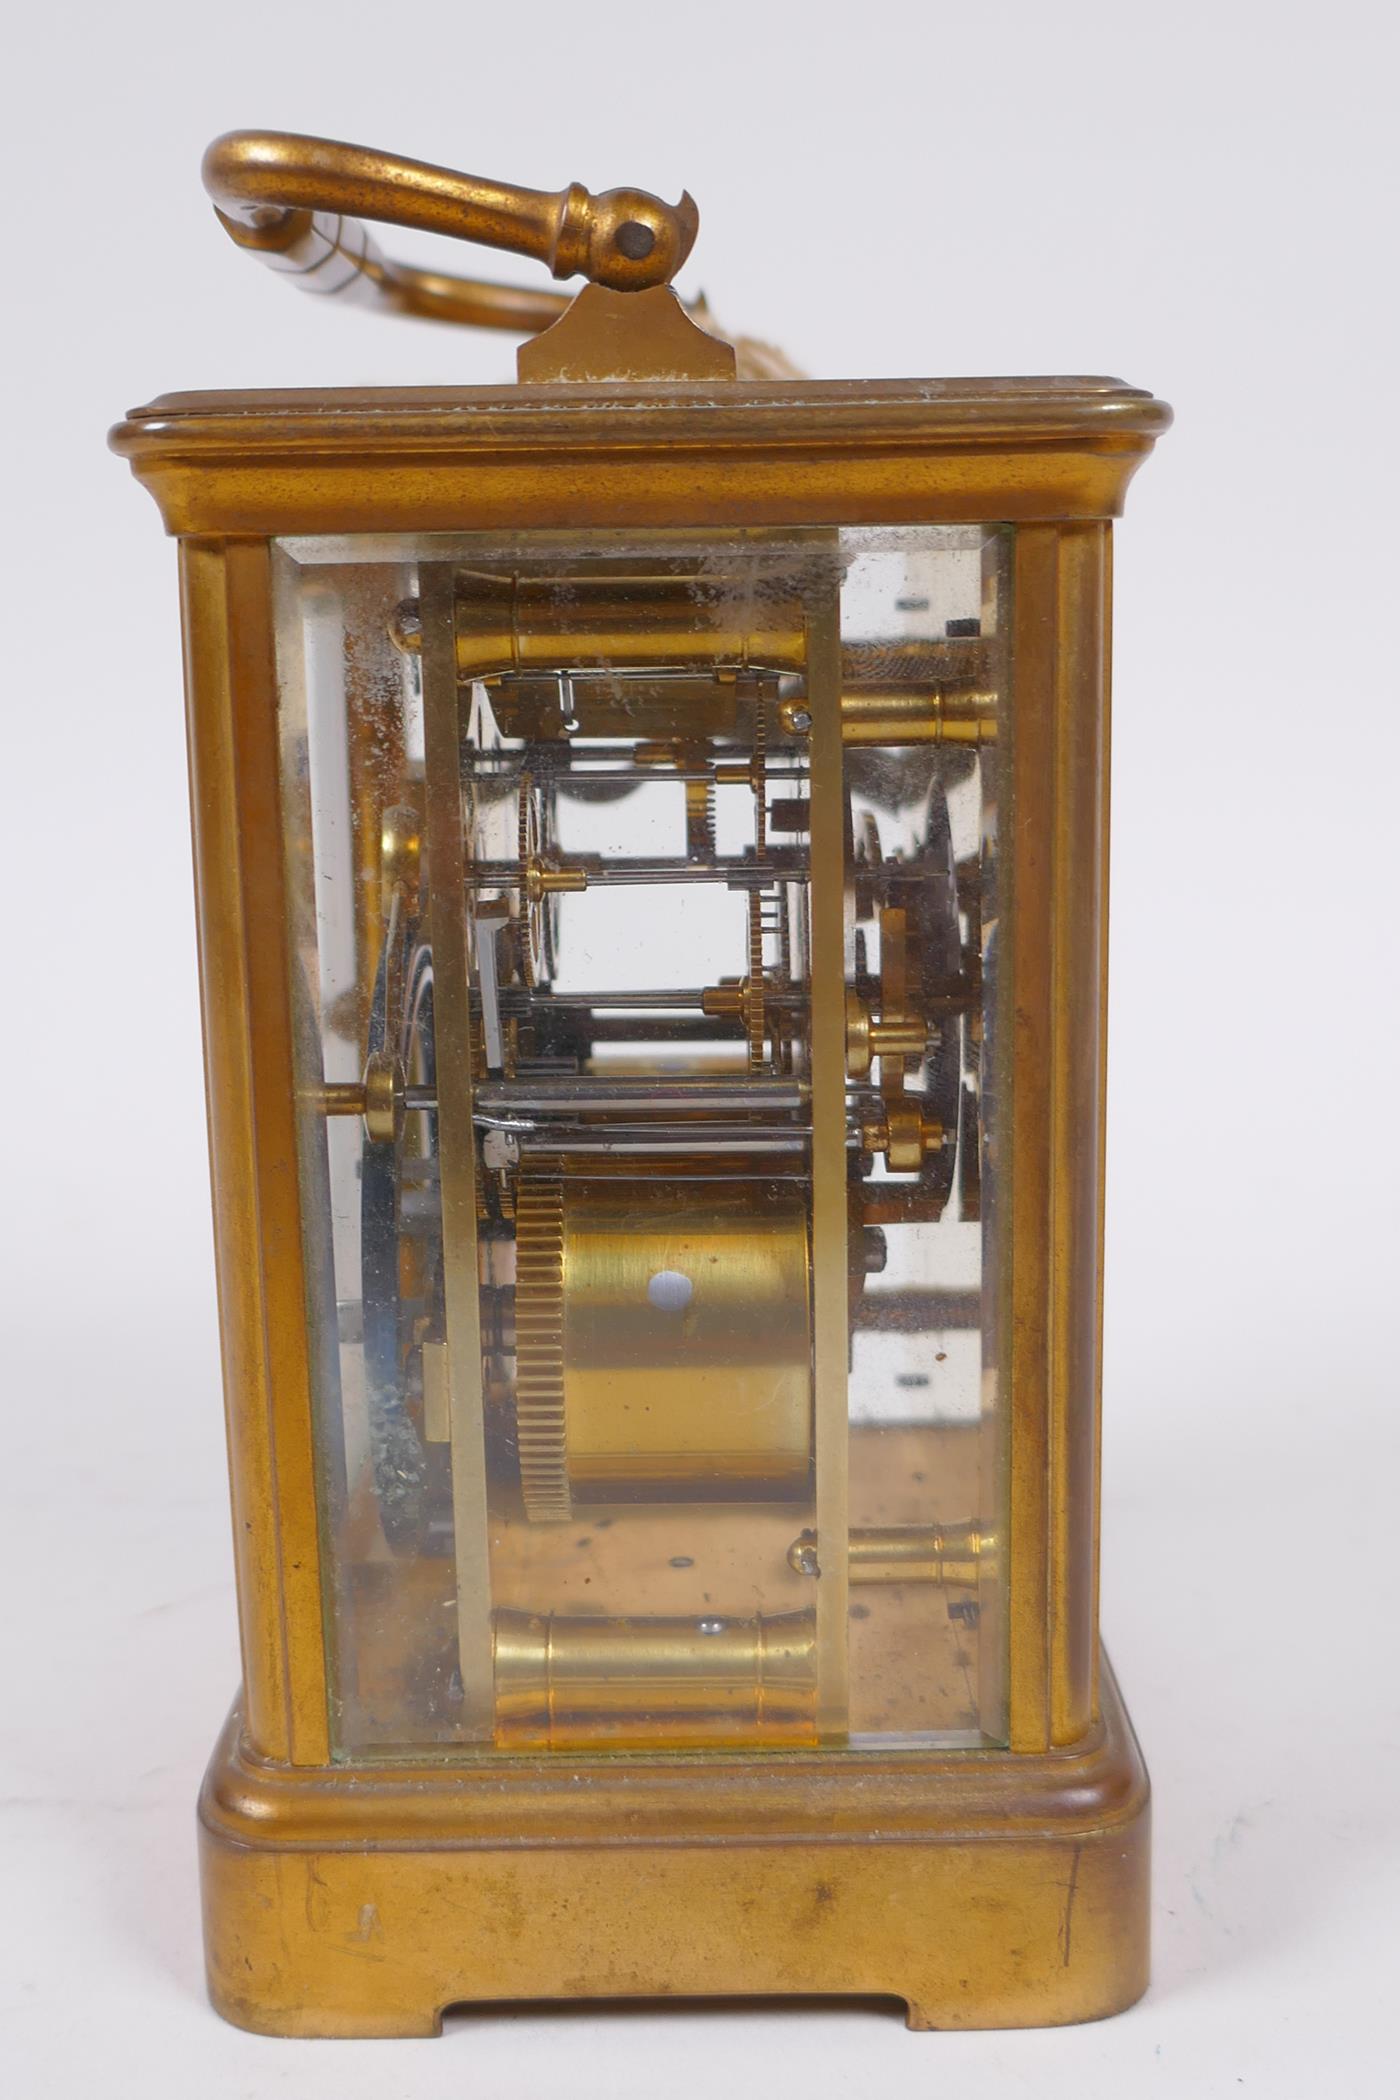 An early C20th French brass carriage clock striking on a gong by Richard & Cie,9 x 8cm, 14cm high - Image 3 of 6